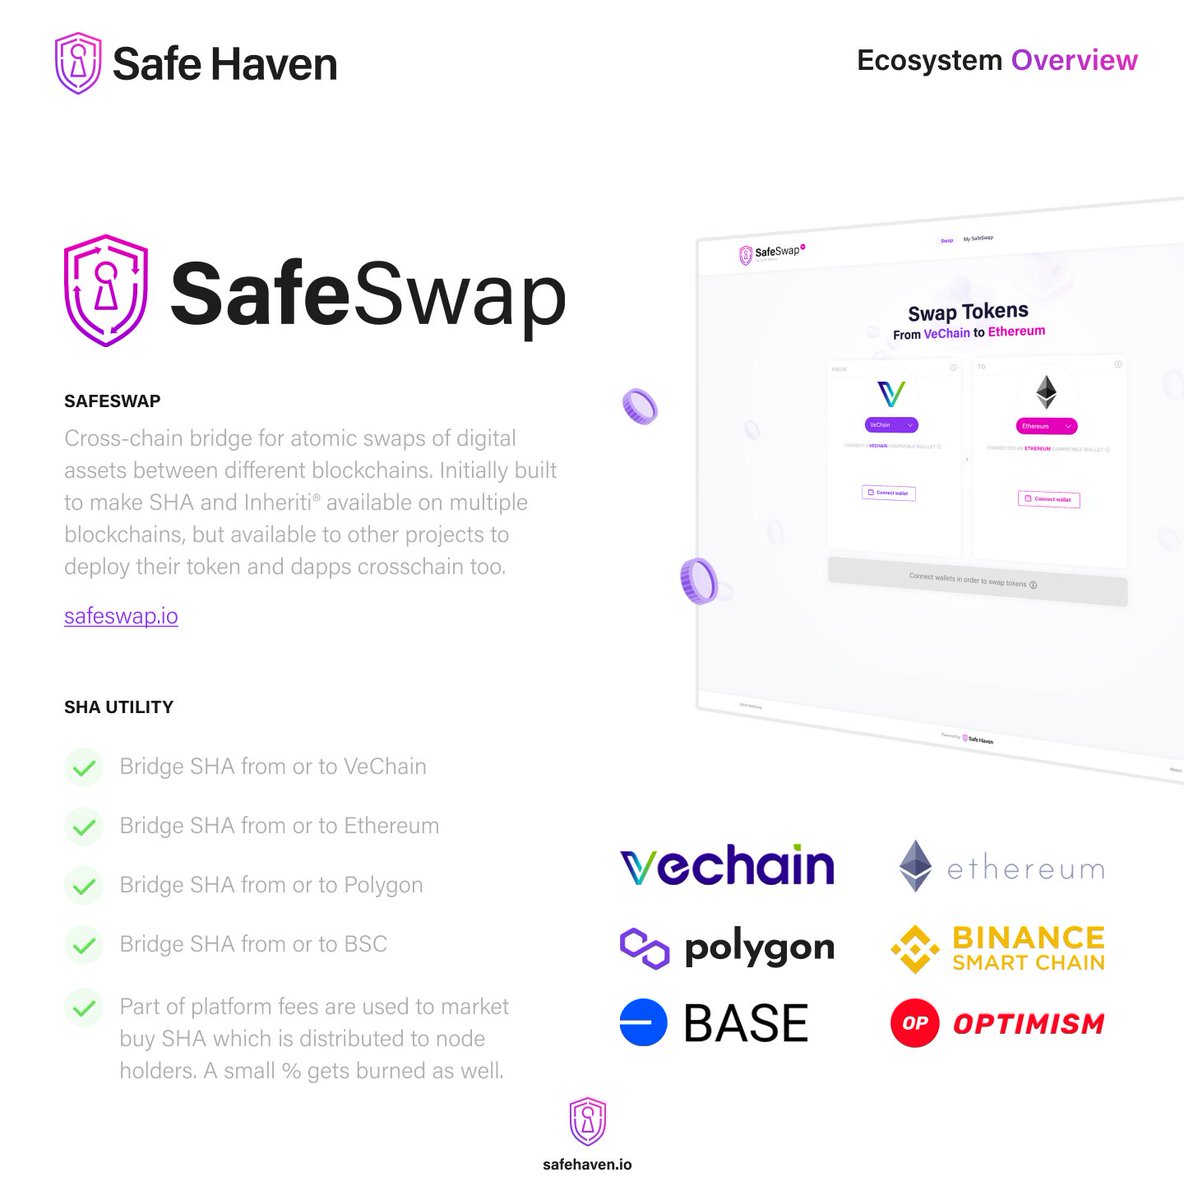 Happy Monday! Let's start the week strong.

Something exciting is brewing with #SafeSwap!

Keep your eyes peeled for a game-changing token listing that's about to shake up our platform.

$SHA #VeChain #CrossChain